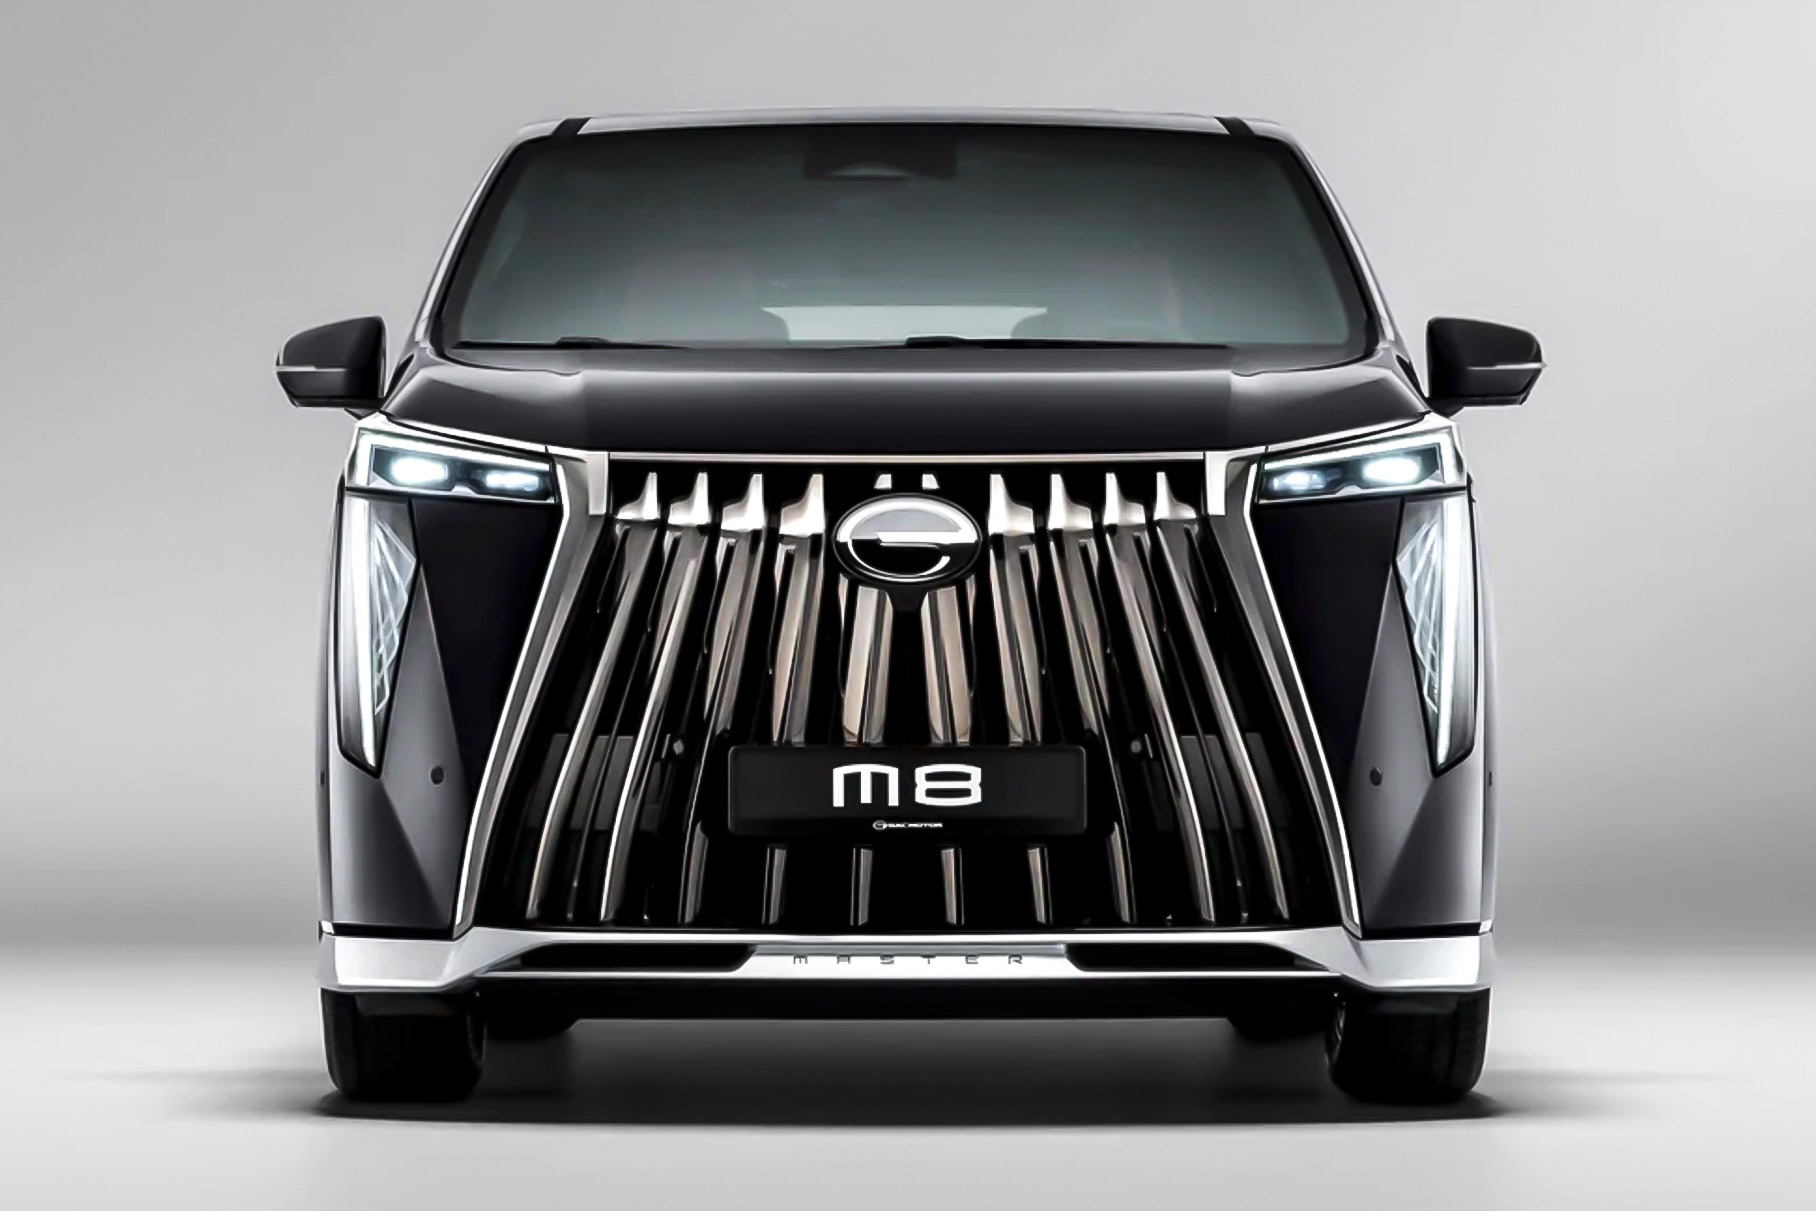 GAC M8 for $600K: Everything You Need to Know About the Luxury Minivan from China